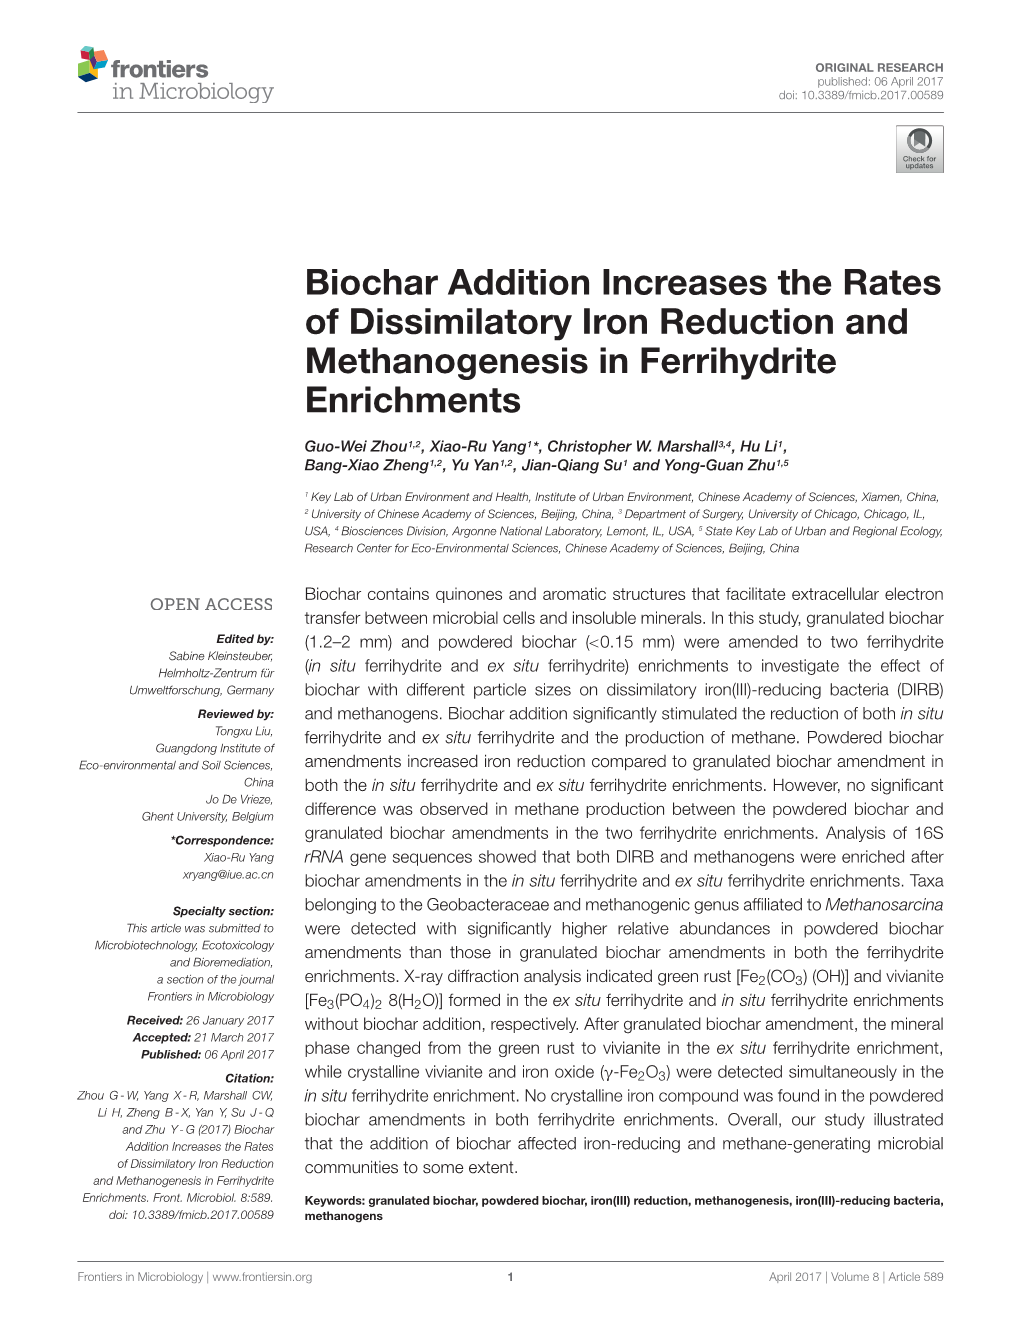 Biochar Addition Increases the Rates of Dissimilatory Iron Reduction and Methanogenesis in Ferrihydrite Enrichments